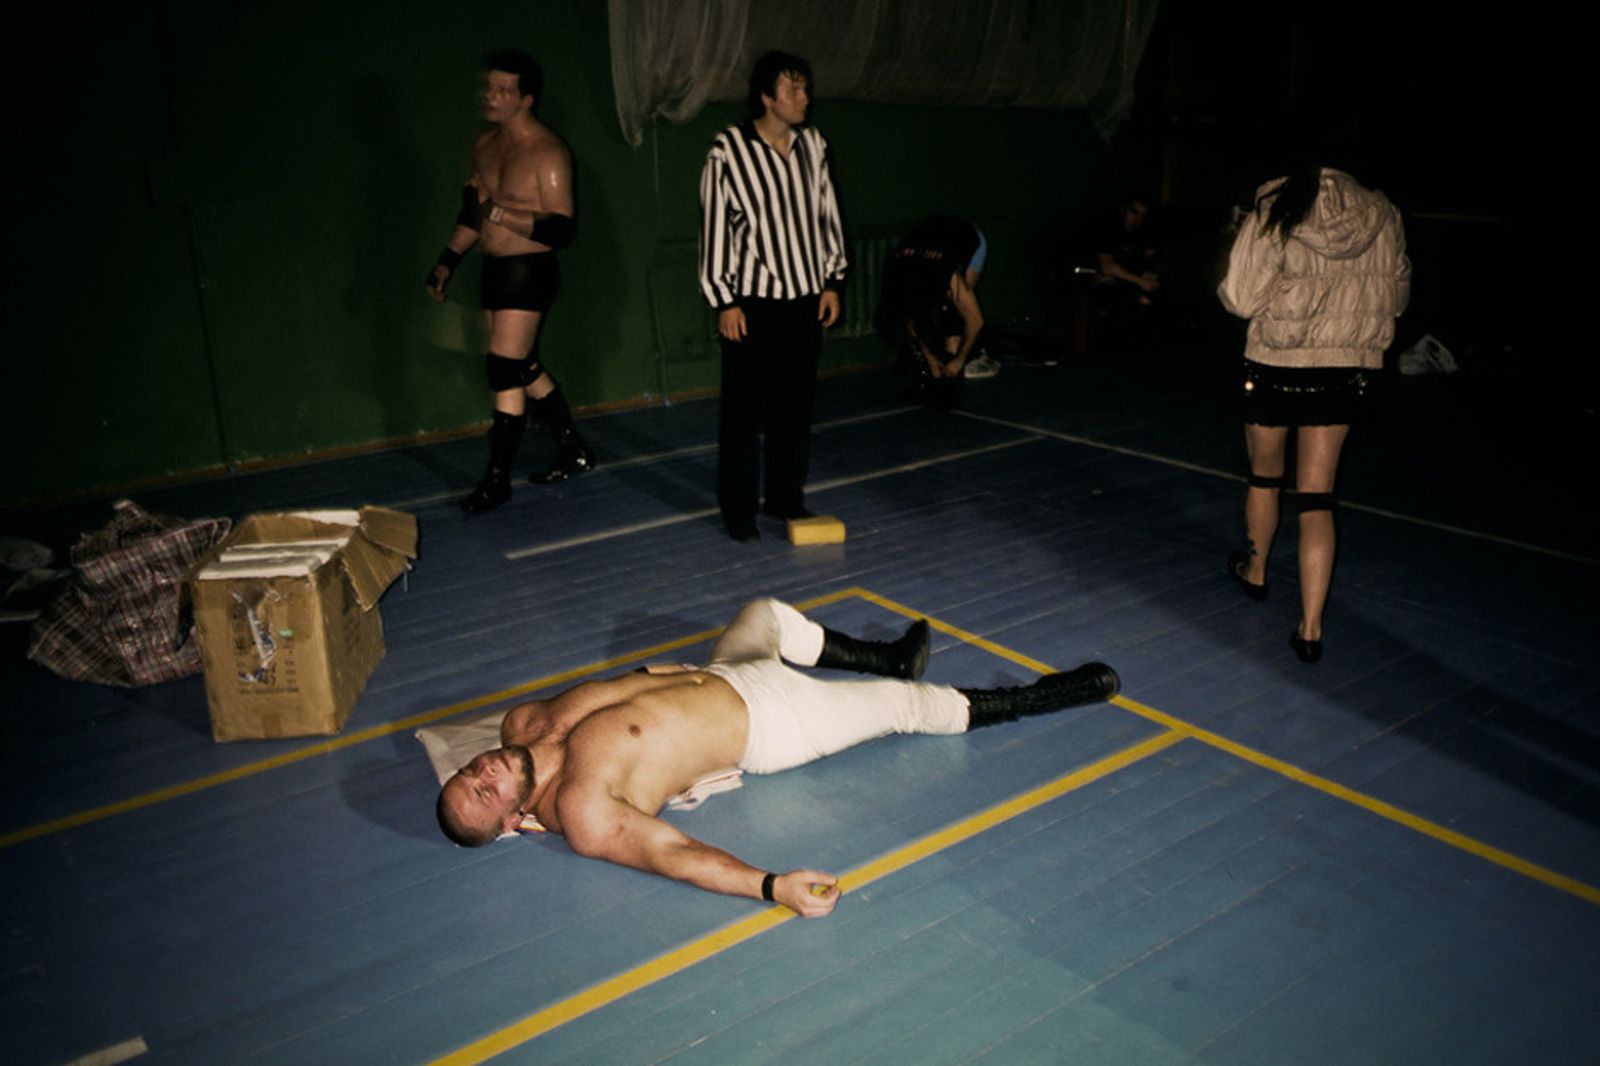 © Dmitry Lookianov - Image from the Wrestling in Moscow photography project